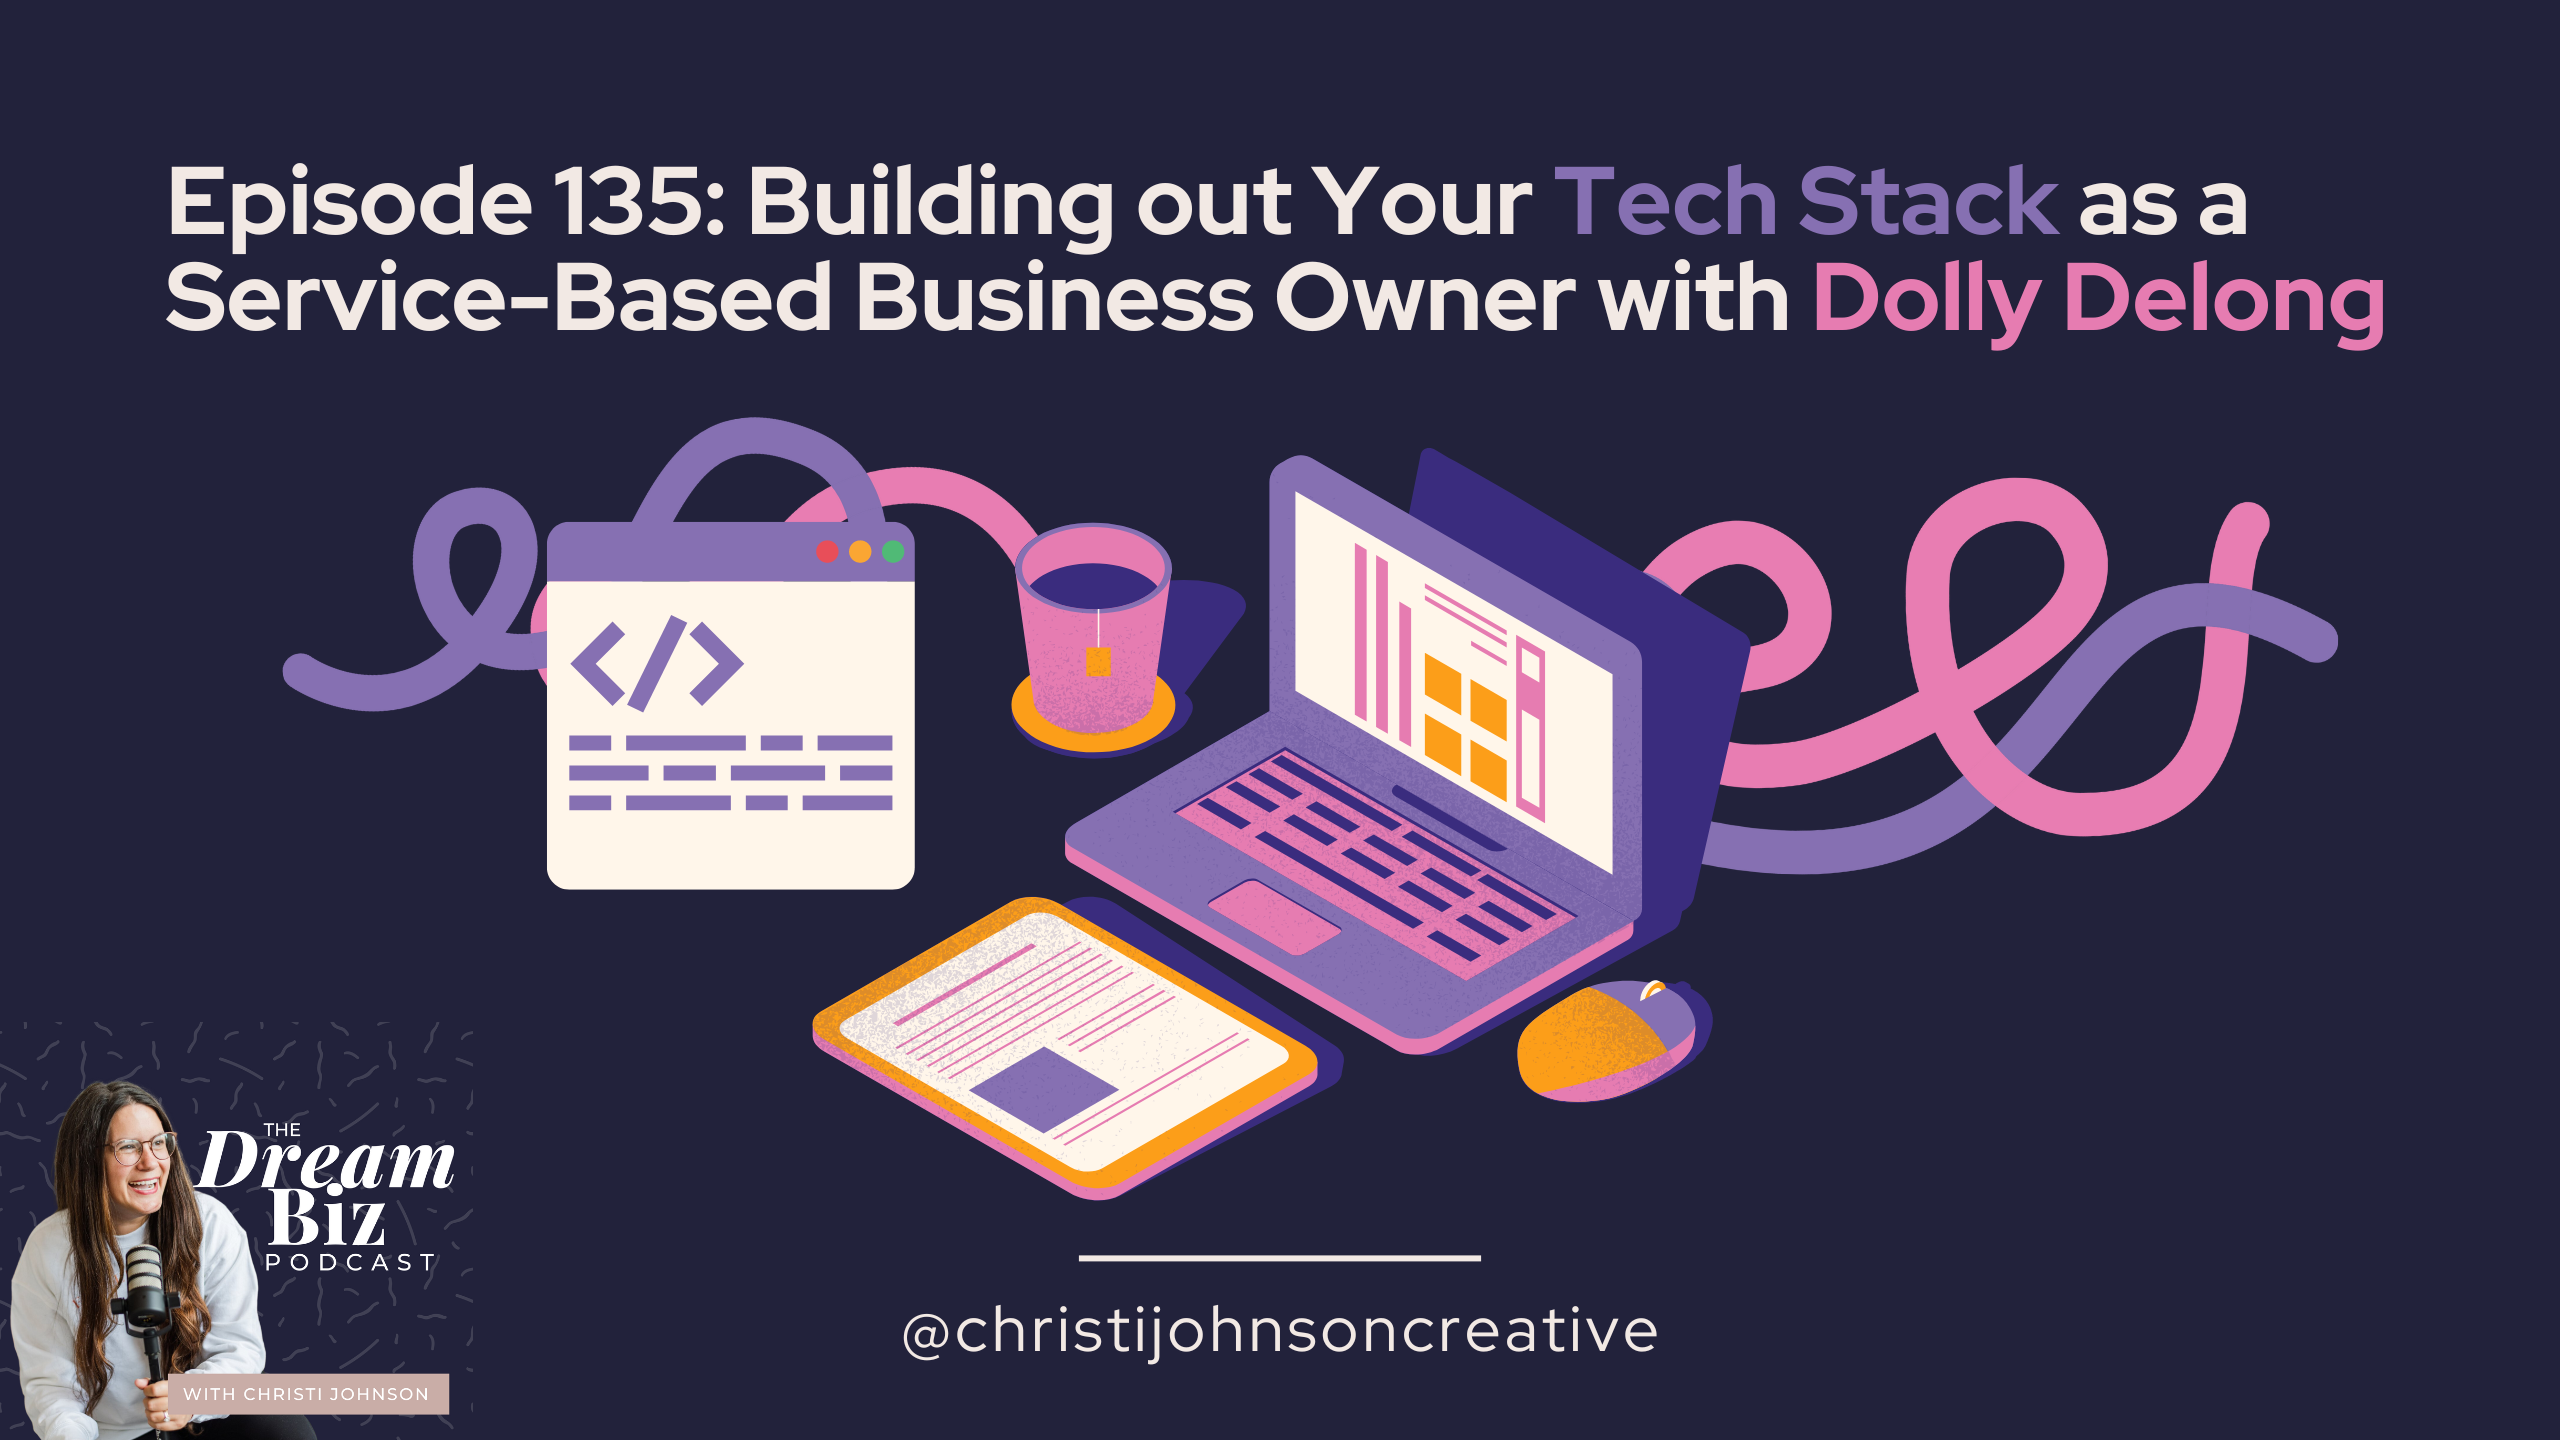 ID: Episode 135 - Building out your Tech Stack as a Service-based Business Owner with Dolly Delong.